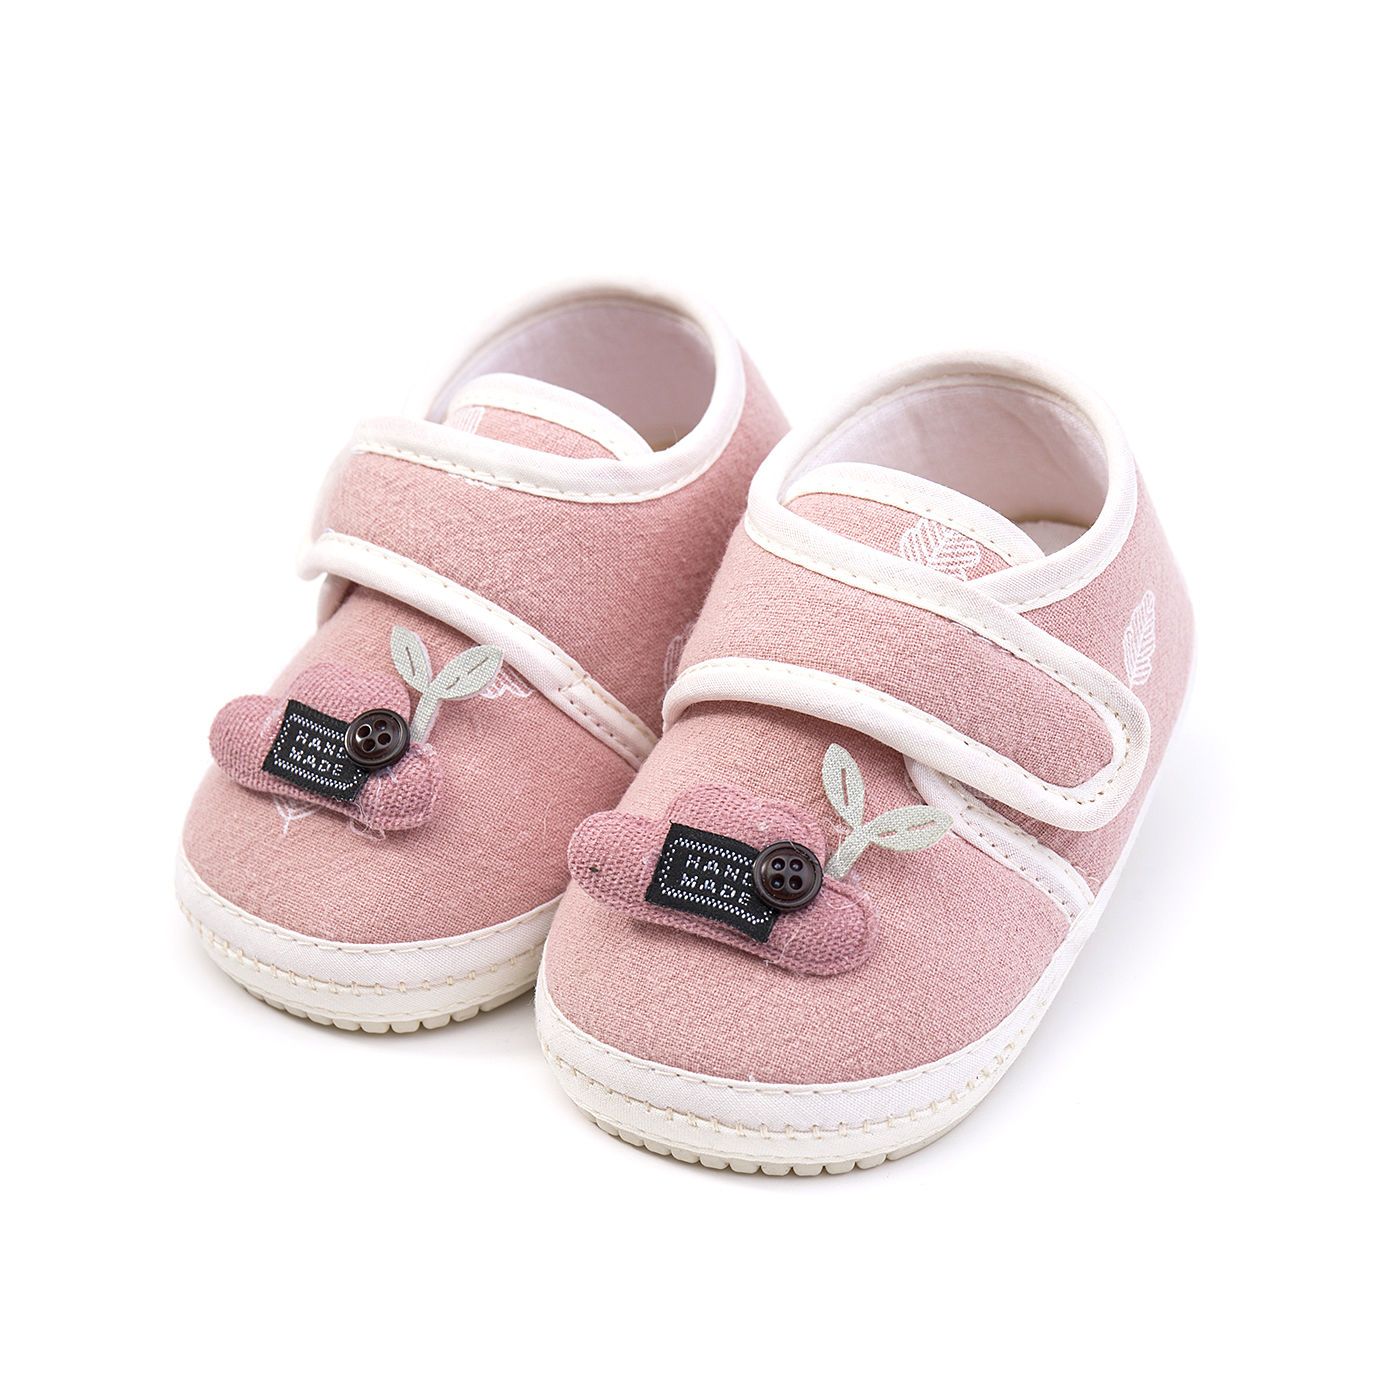 0-1 year old baby shoes male 6-8 months baby shoes spring and autumn March newborn soft soled shoes 10-12 months antiskid walking shoes